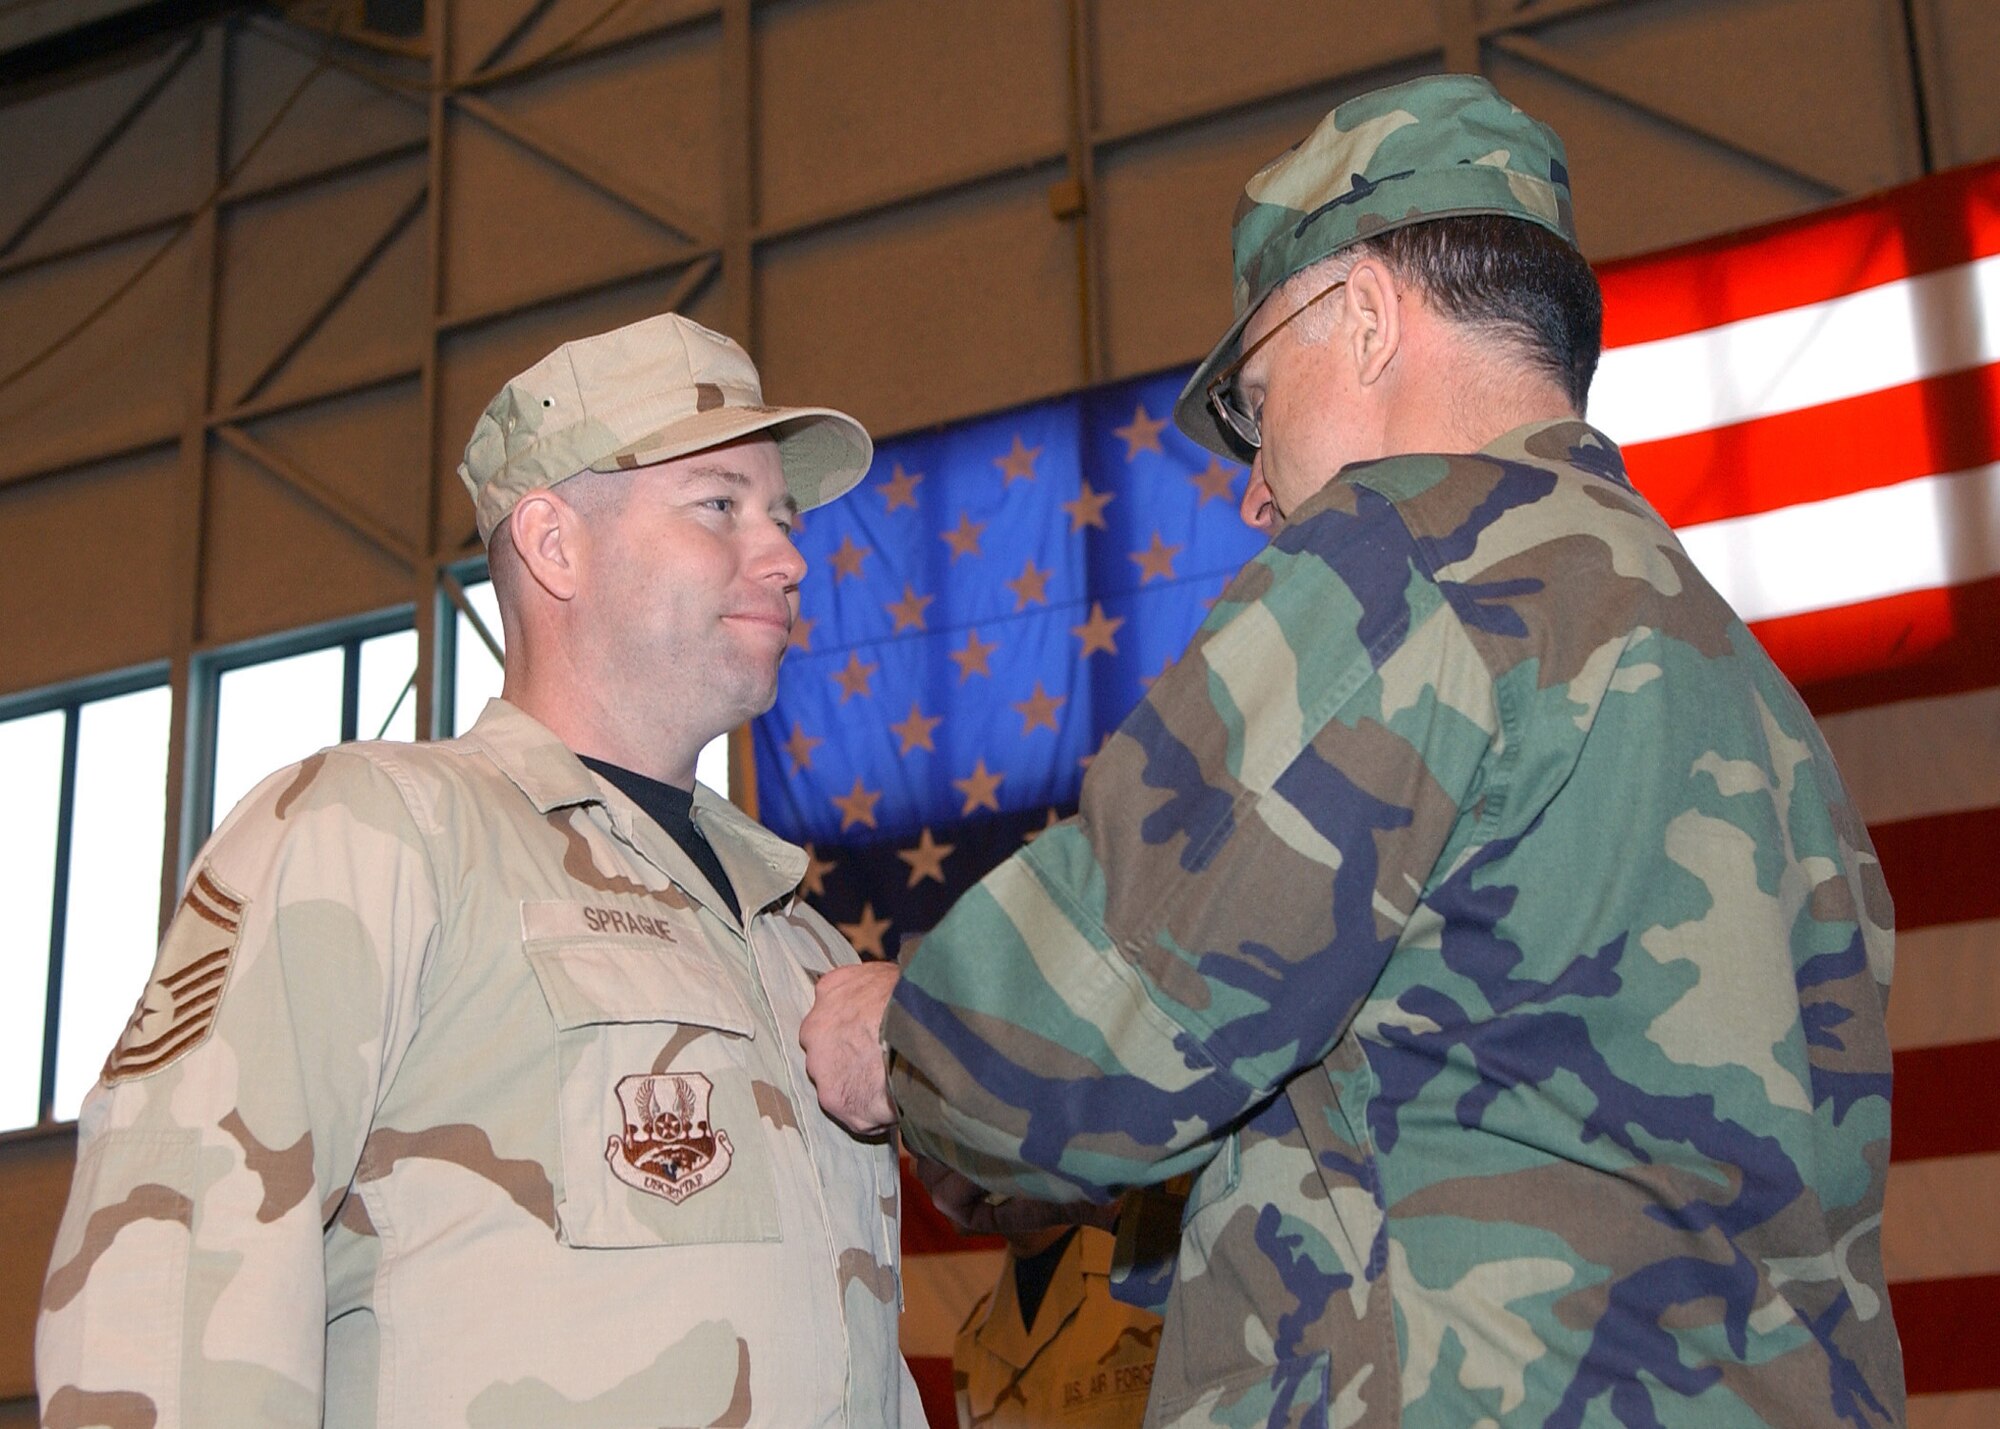 Senior Master Sgt. Dean Sprague, 354th Logistics Readiness Squadron, accepts the Soldier's Medal from 354th Fighter Wing Commander Brig. Gen. Dave Scott during a Welcome Home Ceremony for returning deployed airmen at Eielson Air Force Base, Alaska March 9.  Sergeant Sprague's heroic efforts saved the lives of five Afghan civilians during his deployment.  (U.S. Air Force Photo/Staff Sgt. Tia Schroeder).